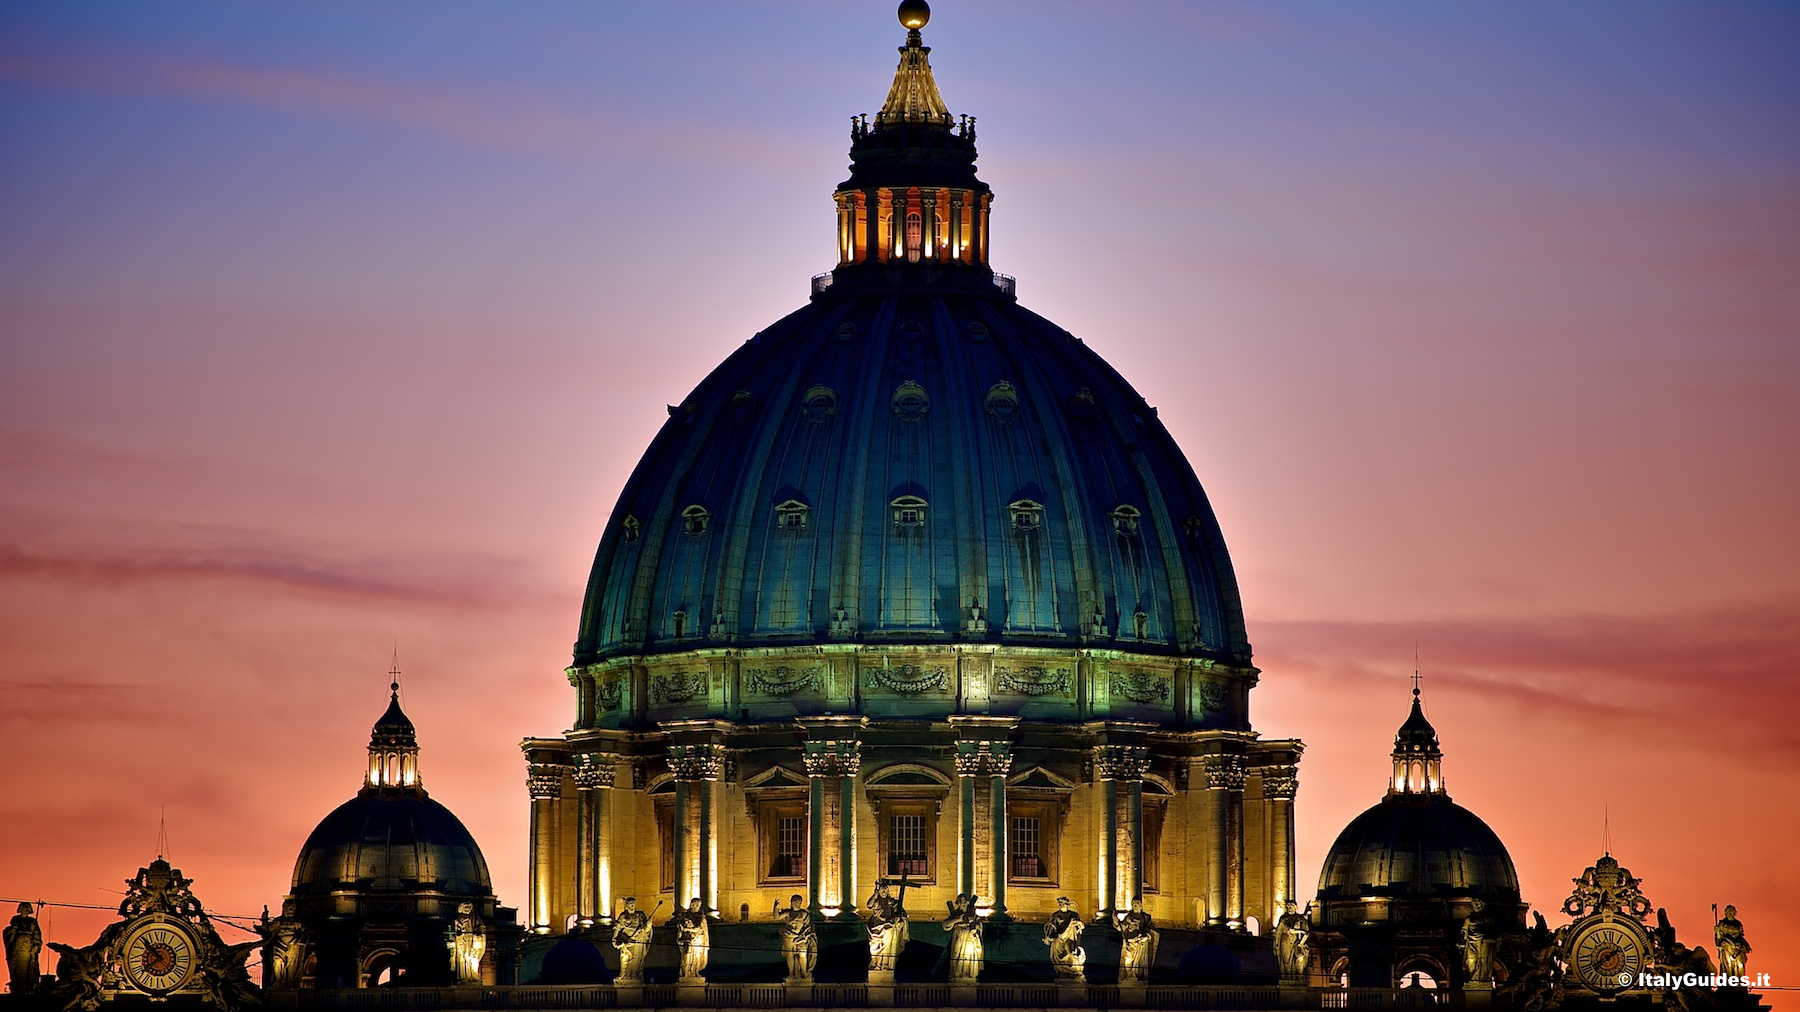 Pictures of St Peter’s Basilica, Rome